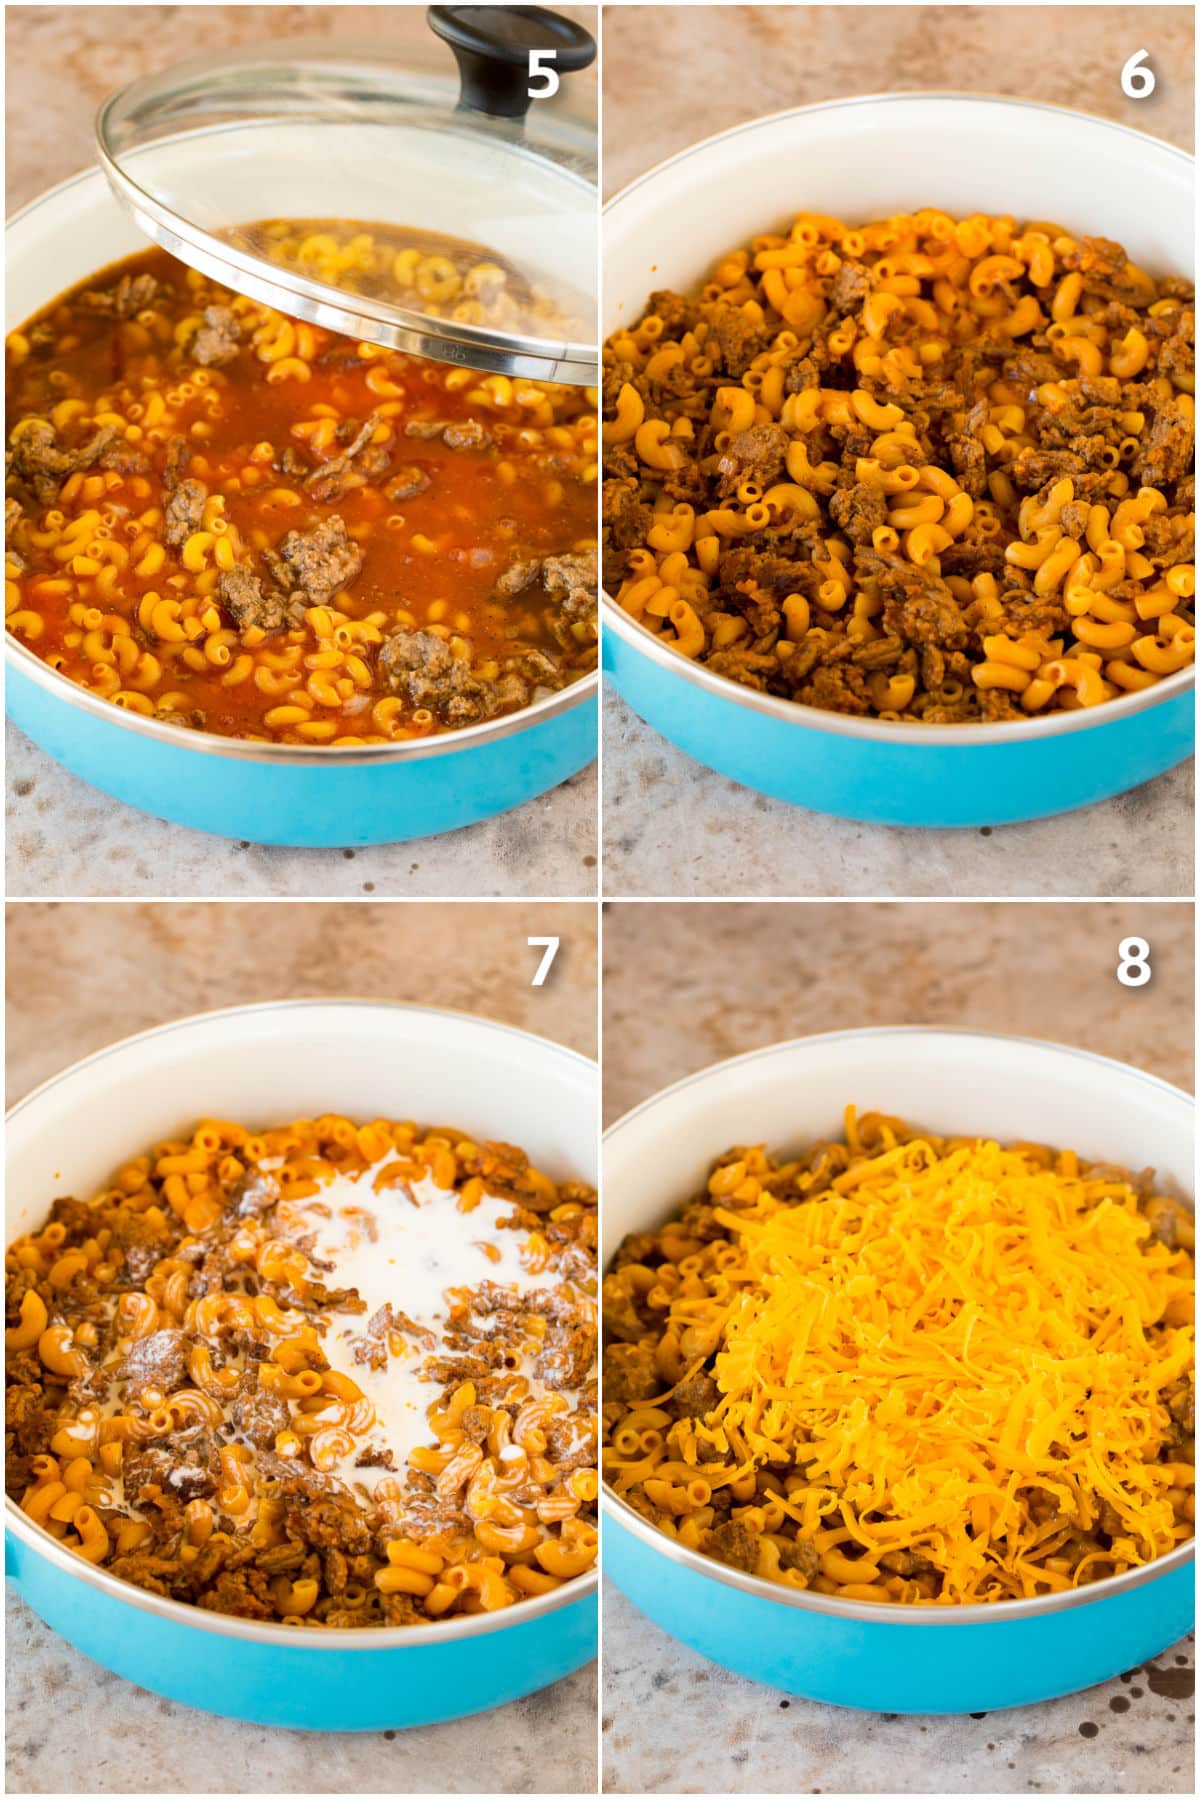 Step by step images showing how to make hamburger helper.